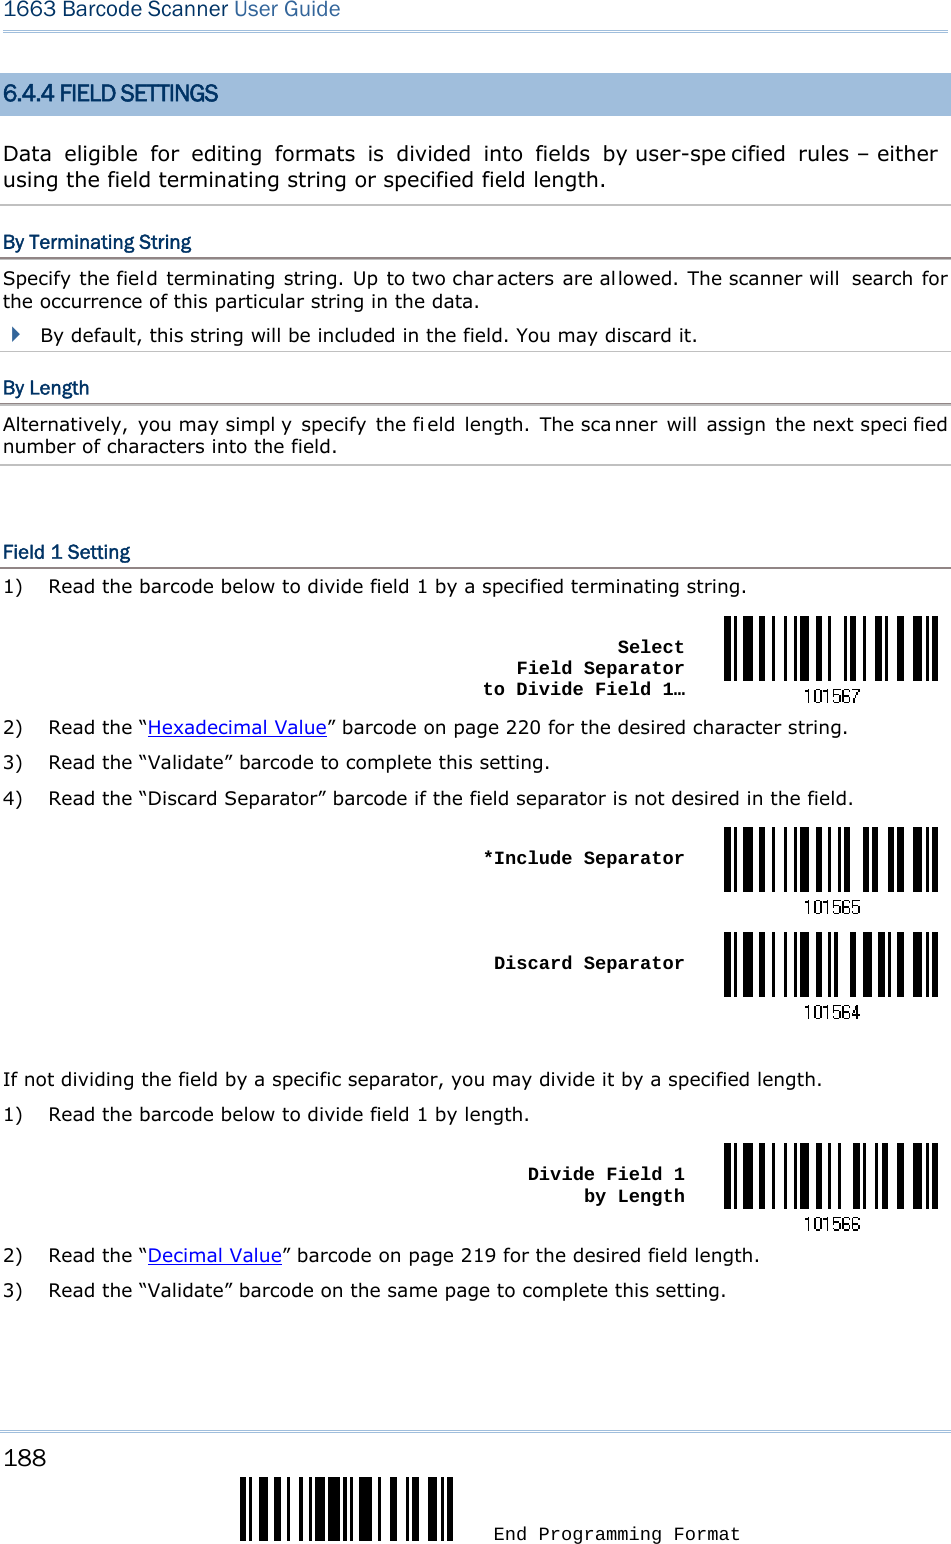 188  End Programming Format 1663 Barcode Scanner User Guide  6.4.4 FIELD SETTINGS Data eligible for editing formats is divided into fields by user-spe cified rules – either  using the field terminating string or specified field length. By Terminating String Specify the field terminating string. Up to two char acters are allowed. The scanner will  search for the occurrence of this particular string in the data.    By default, this string will be included in the field. You may discard it. By Length Alternatively, you may simpl y specify the fi eld length. The sca nner will assign the next speci fied number of characters into the field.  Field 1 Setting 1)  Read the barcode below to divide field 1 by a specified terminating string.  Select  Field Separator  to Divide Field 1…2)  Read the “Hexadecimal Value” barcode on page 220 for the desired character string. 3)  Read the “Validate” barcode to complete this setting. 4)  Read the “Discard Separator” barcode if the field separator is not desired in the field.  *Include Separator Discard Separator If not dividing the field by a specific separator, you may divide it by a specified length. 1)  Read the barcode below to divide field 1 by length.  Divide Field 1  by Length2)  Read the “Decimal Value” barcode on page 219 for the desired field length. 3)  Read the “Validate” barcode on the same page to complete this setting.   